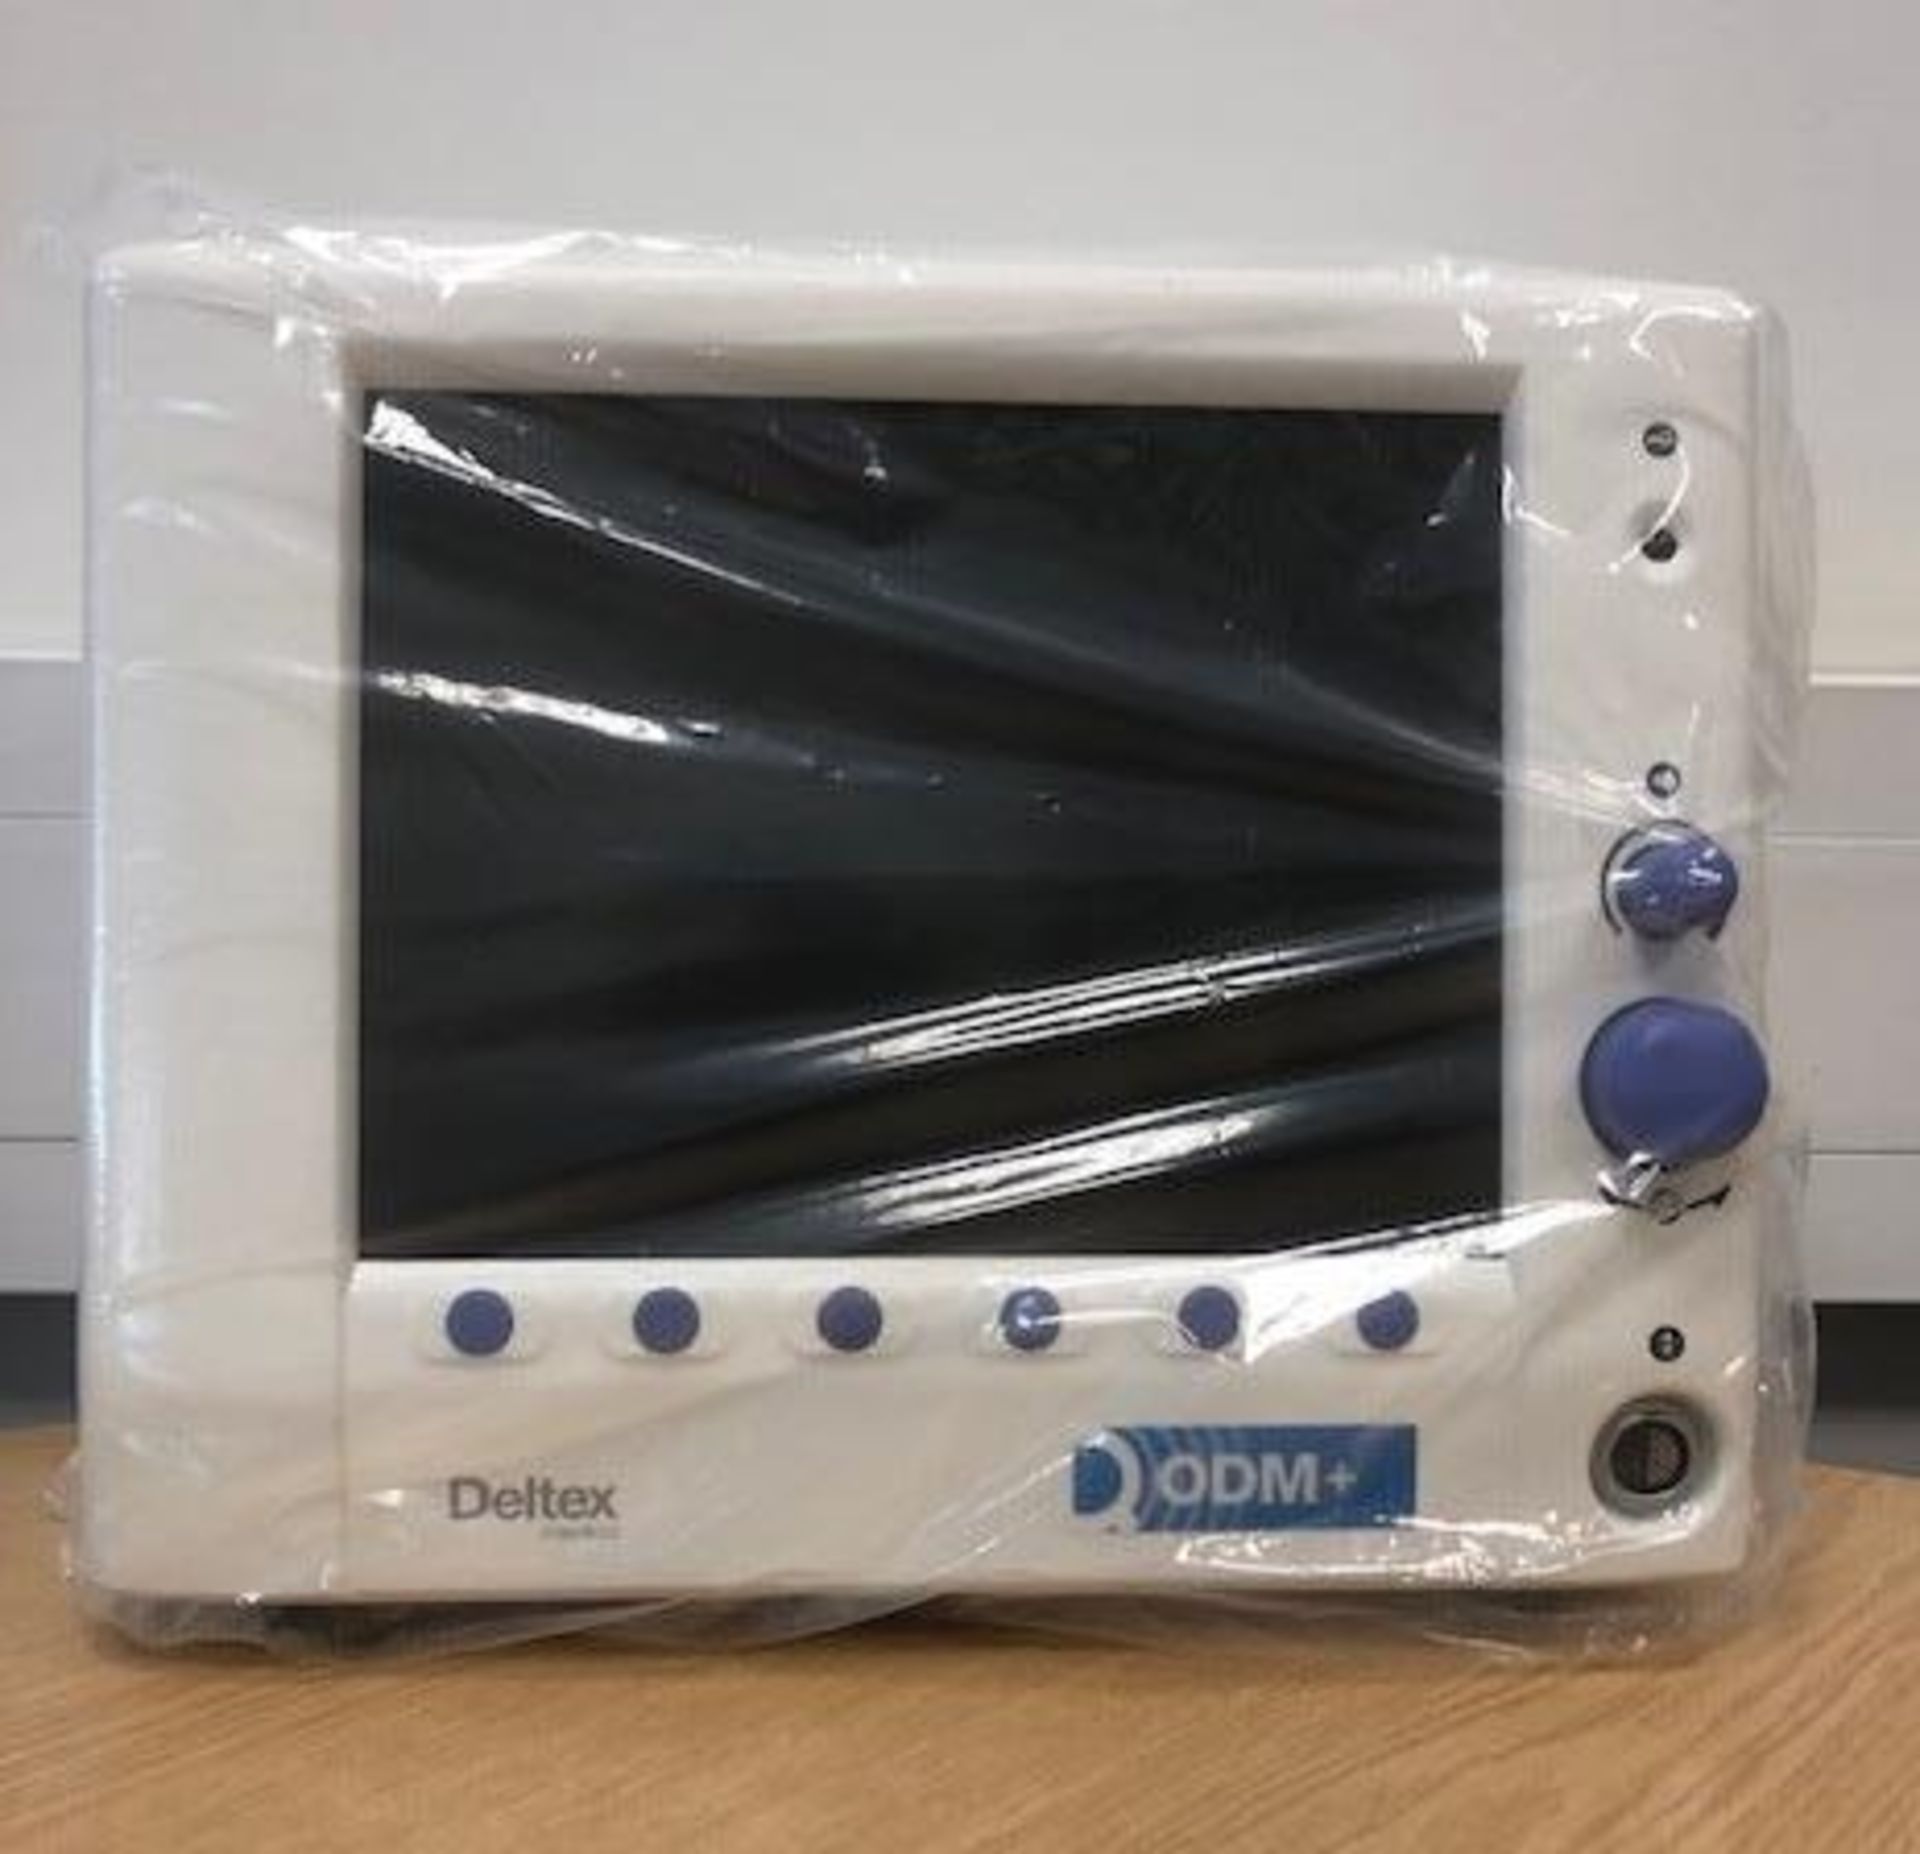 LOCATED OFF SITE - 5x Deltex CardioQ-ODM+ patient monitors - The world’s first fluid manag